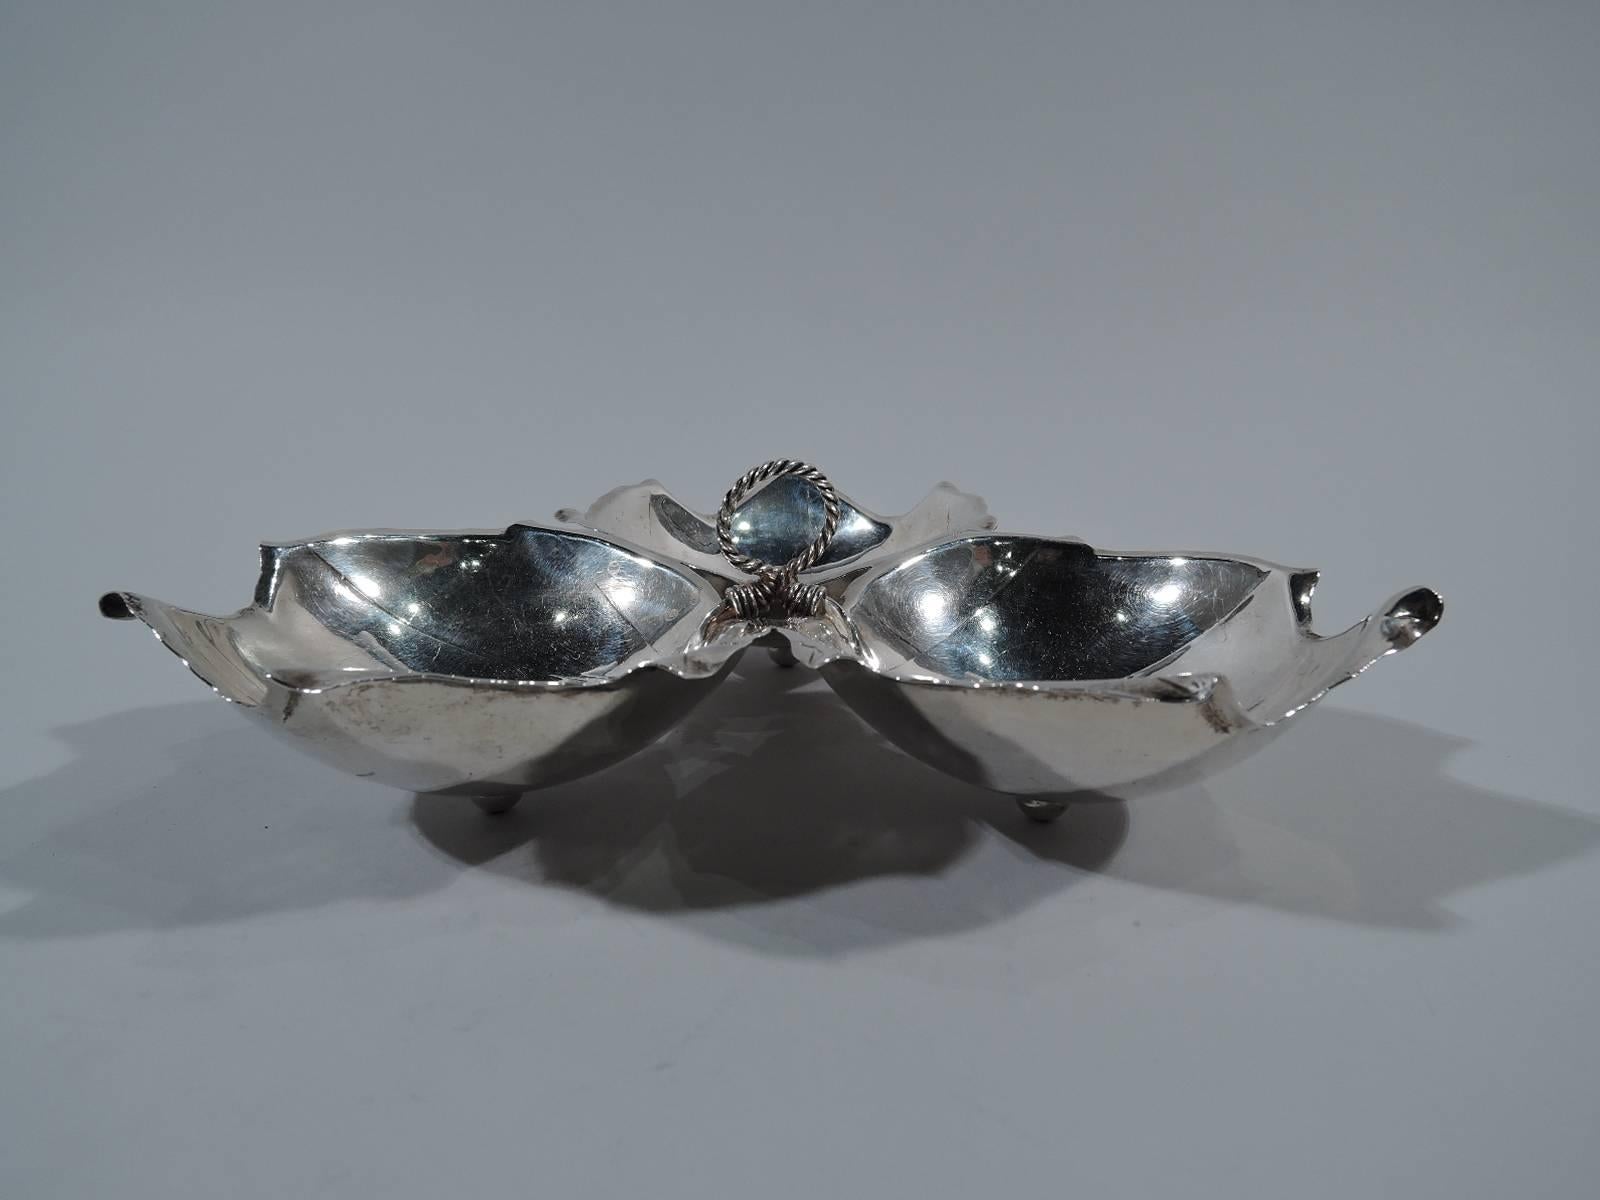 Mid-Century Modern sterling silver chip-and-dip. Made by Alfredo Sciarrotta in Newport, Rhode Island. Three-leaf-form bowls tied together with wire. Realistic veins and irregular point rims. Three ball supports. An iconic period piece. Hallmark